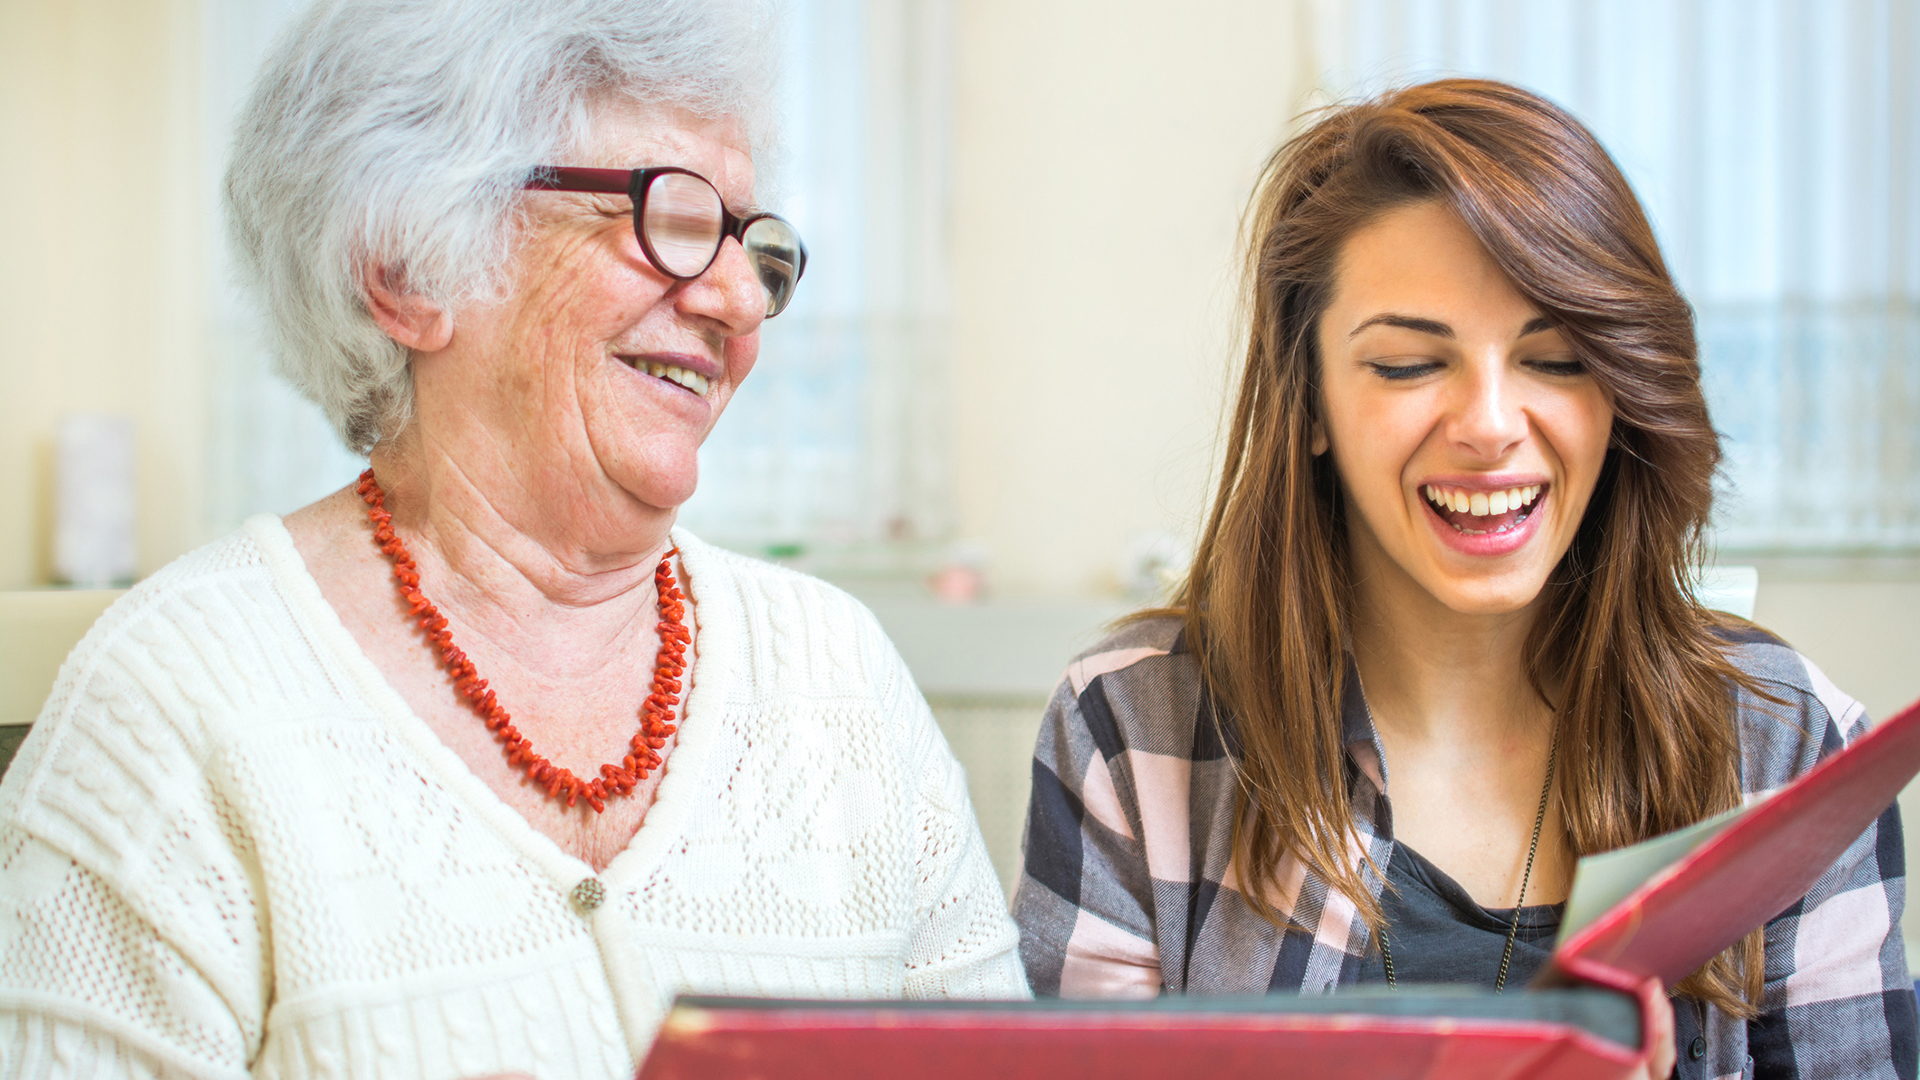 Featured image for “Planning Ahead for a Positive Visit with Someone with Dementia”